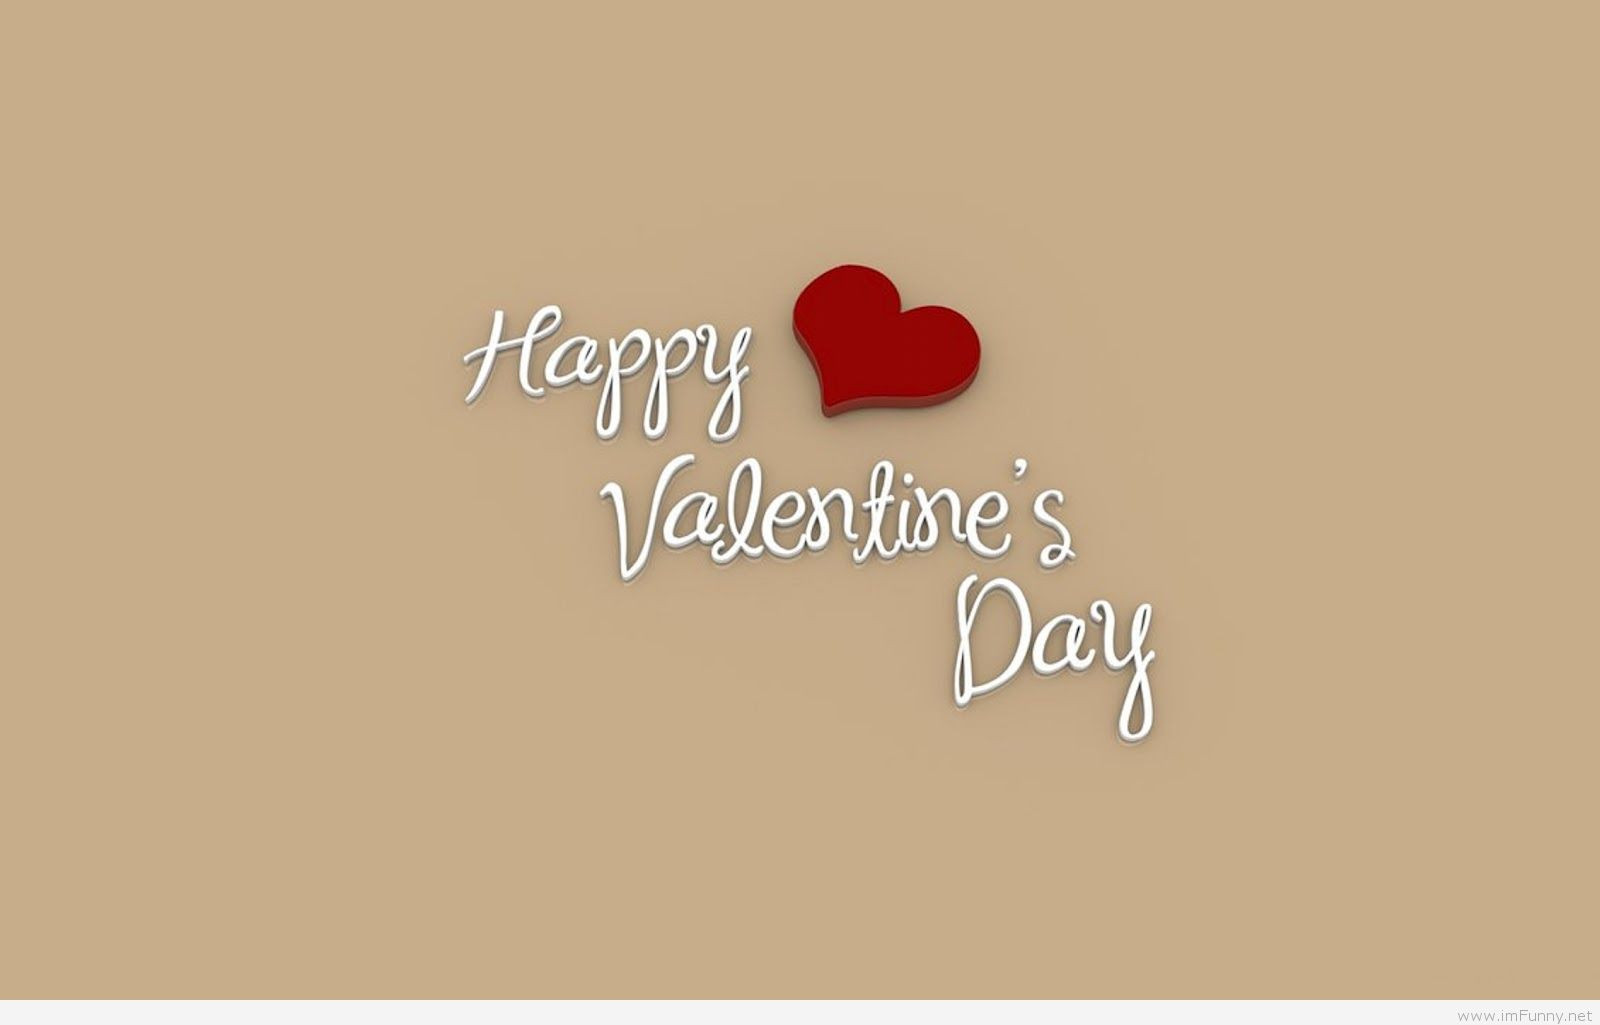 Funny Valentines Day Quotes For Friends
 Cute happy valentine s day sayings friendship happy